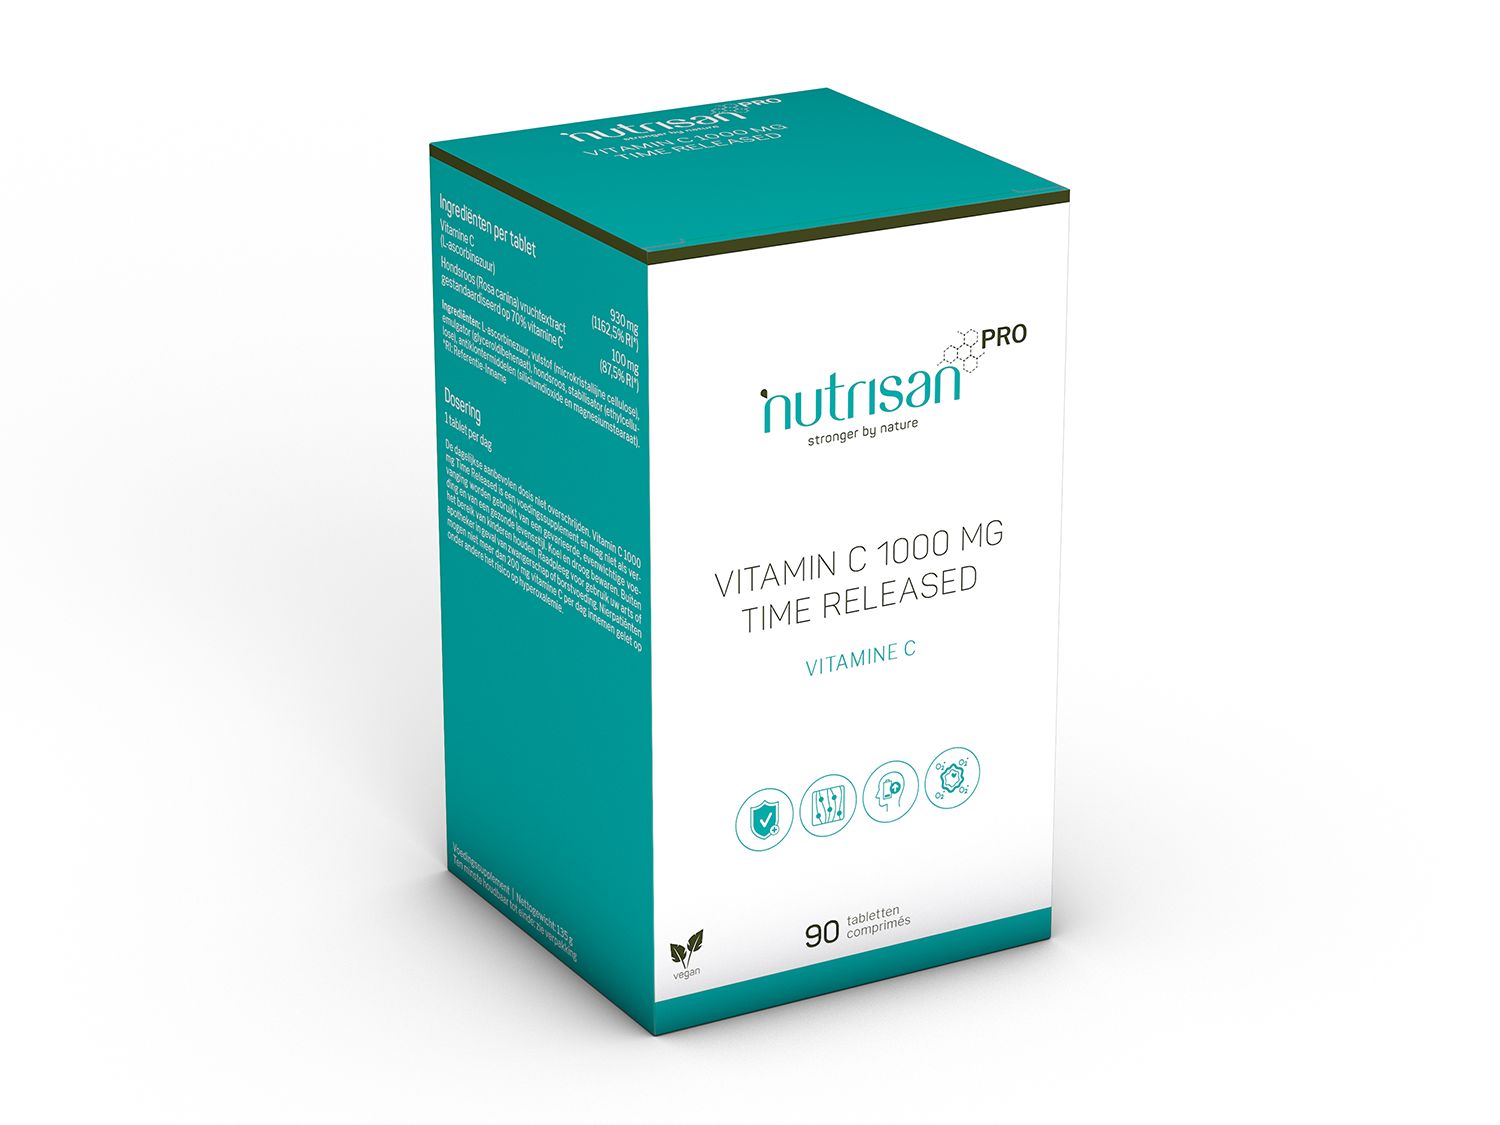 Vitamin C 1000 mg Time Released